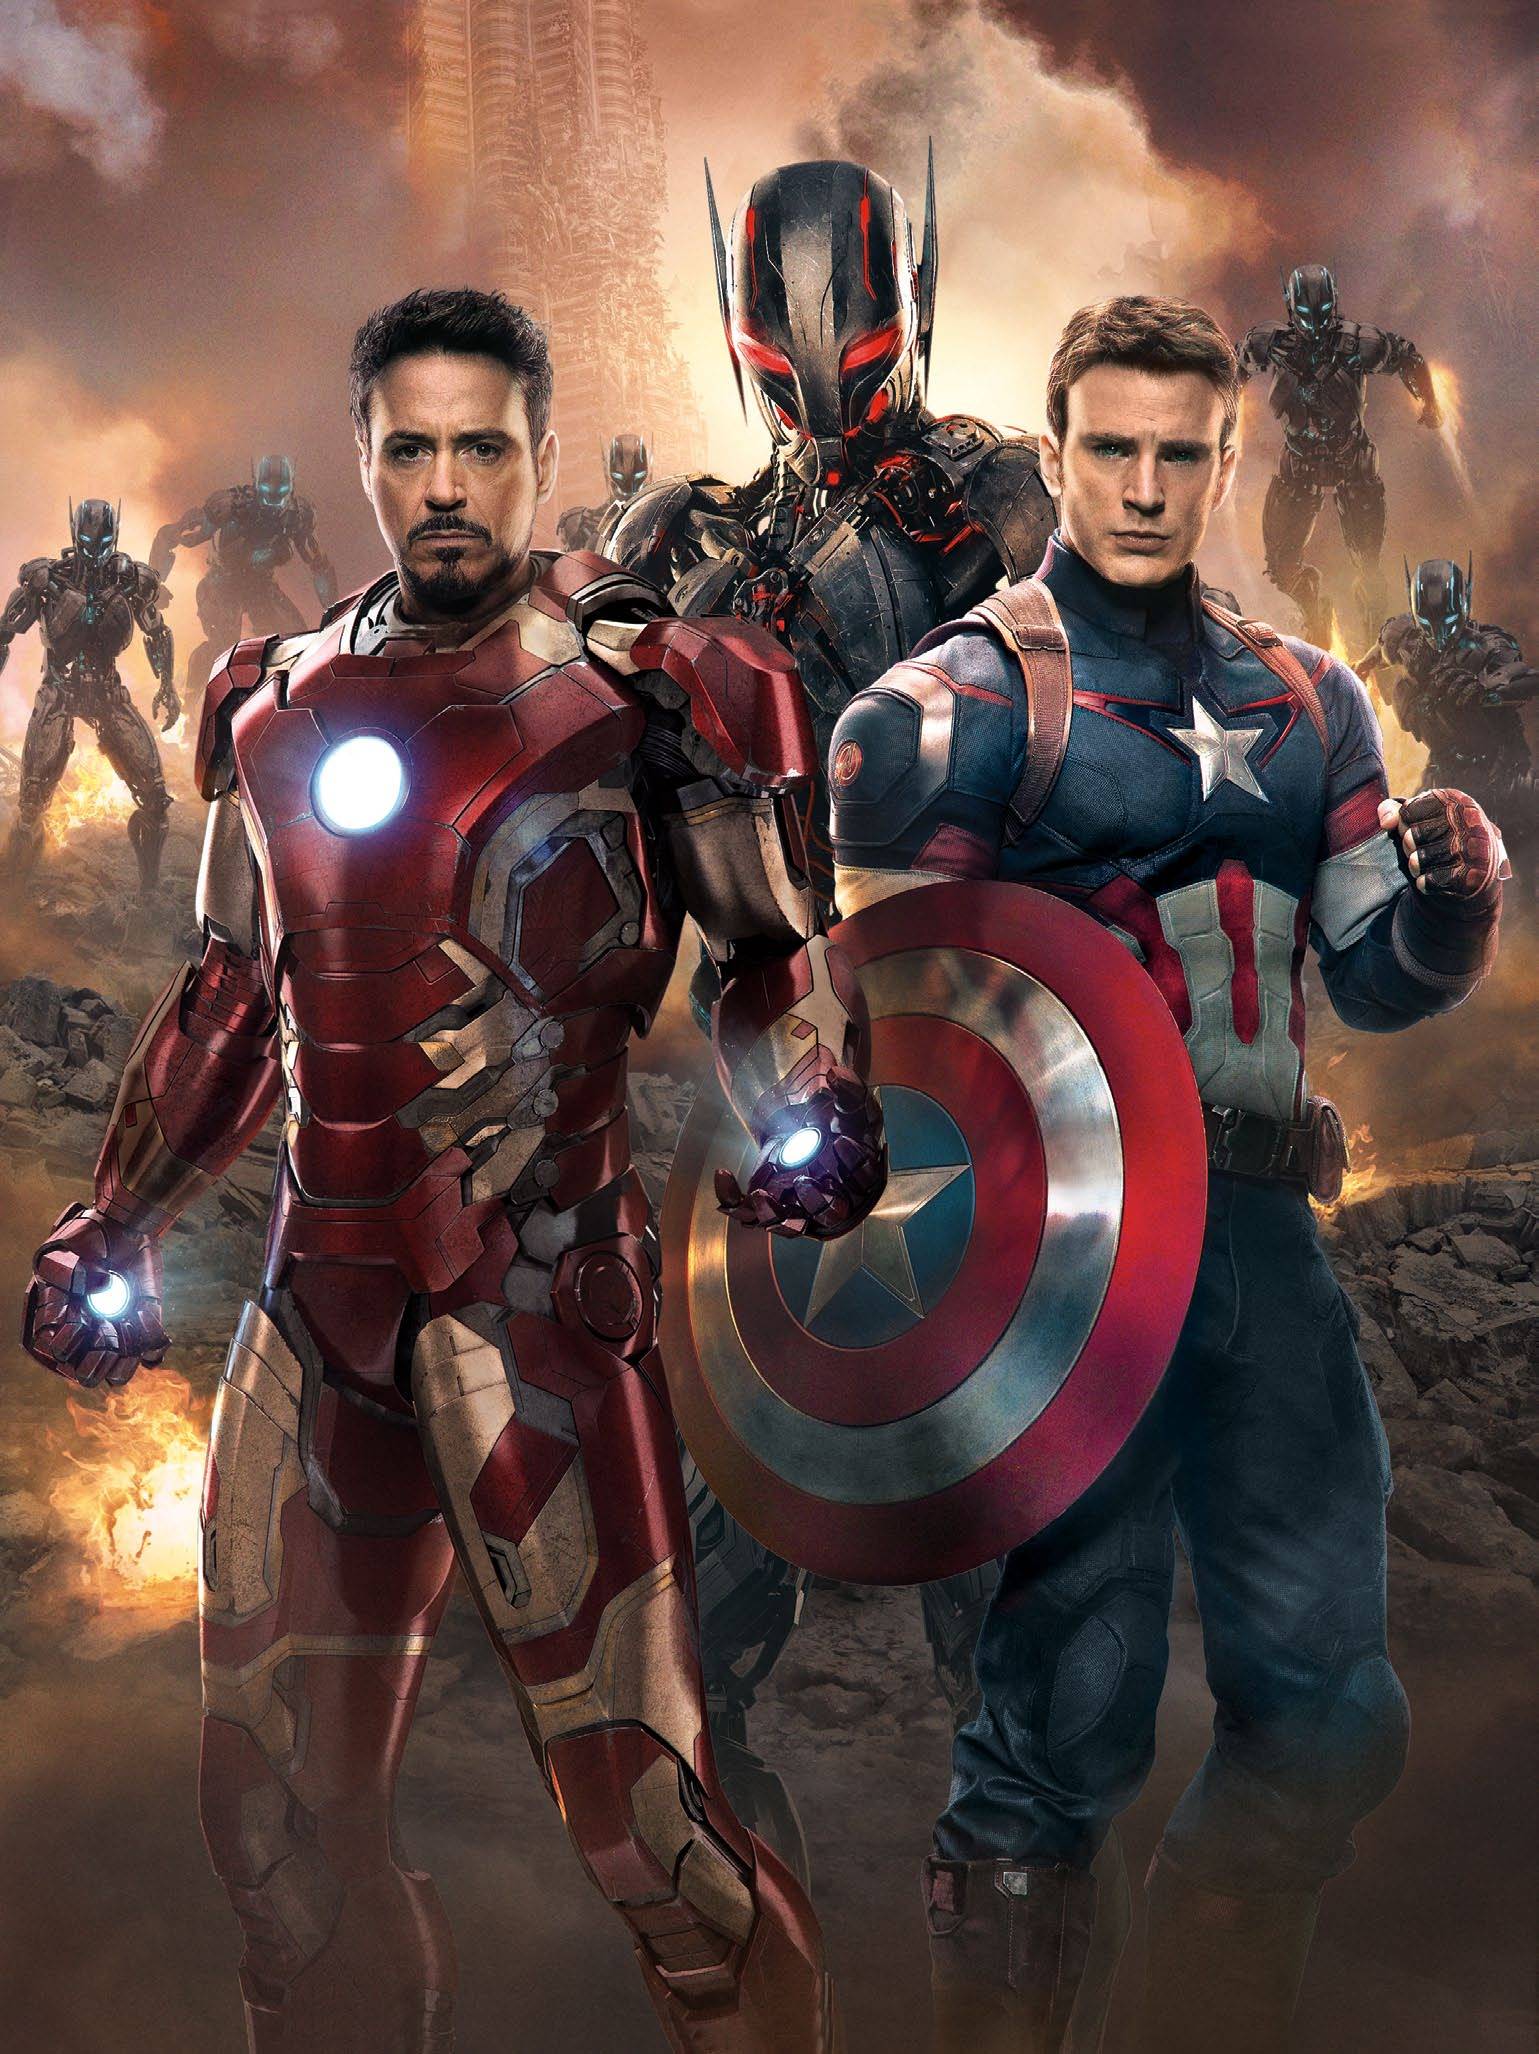 The Avengers: Age Of Ultron Wallpaper - Free Android Application ...